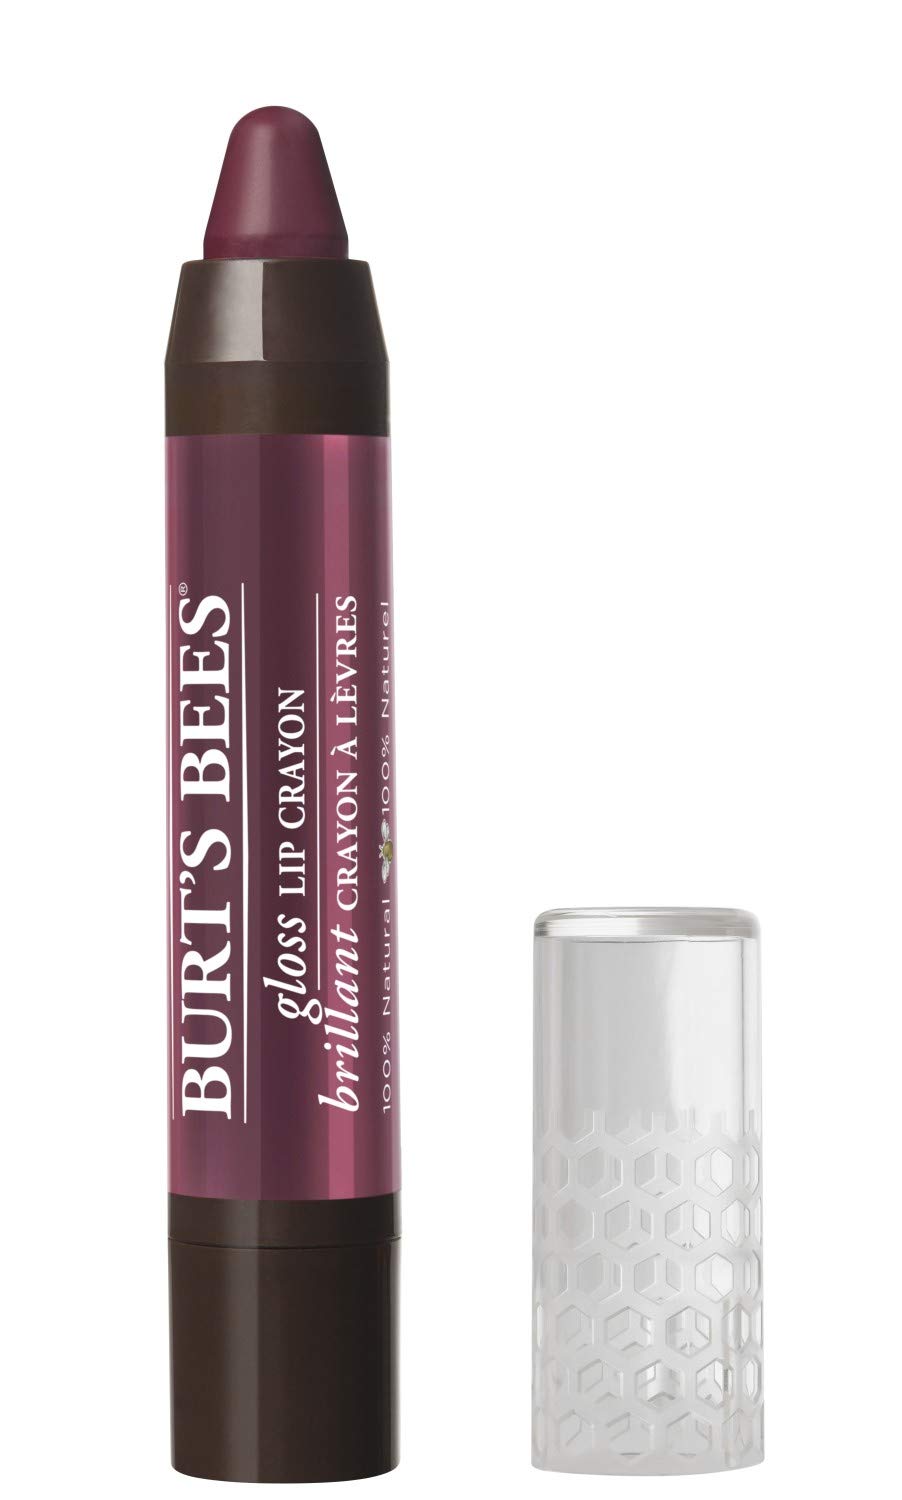 Burt's Bees 100% Natural Moisturizing Gloss Lip Crayon (Bordeaux Vines) $3.05 w/ S&S + Free Shipping w/ Amazon Prime or Orders $25+